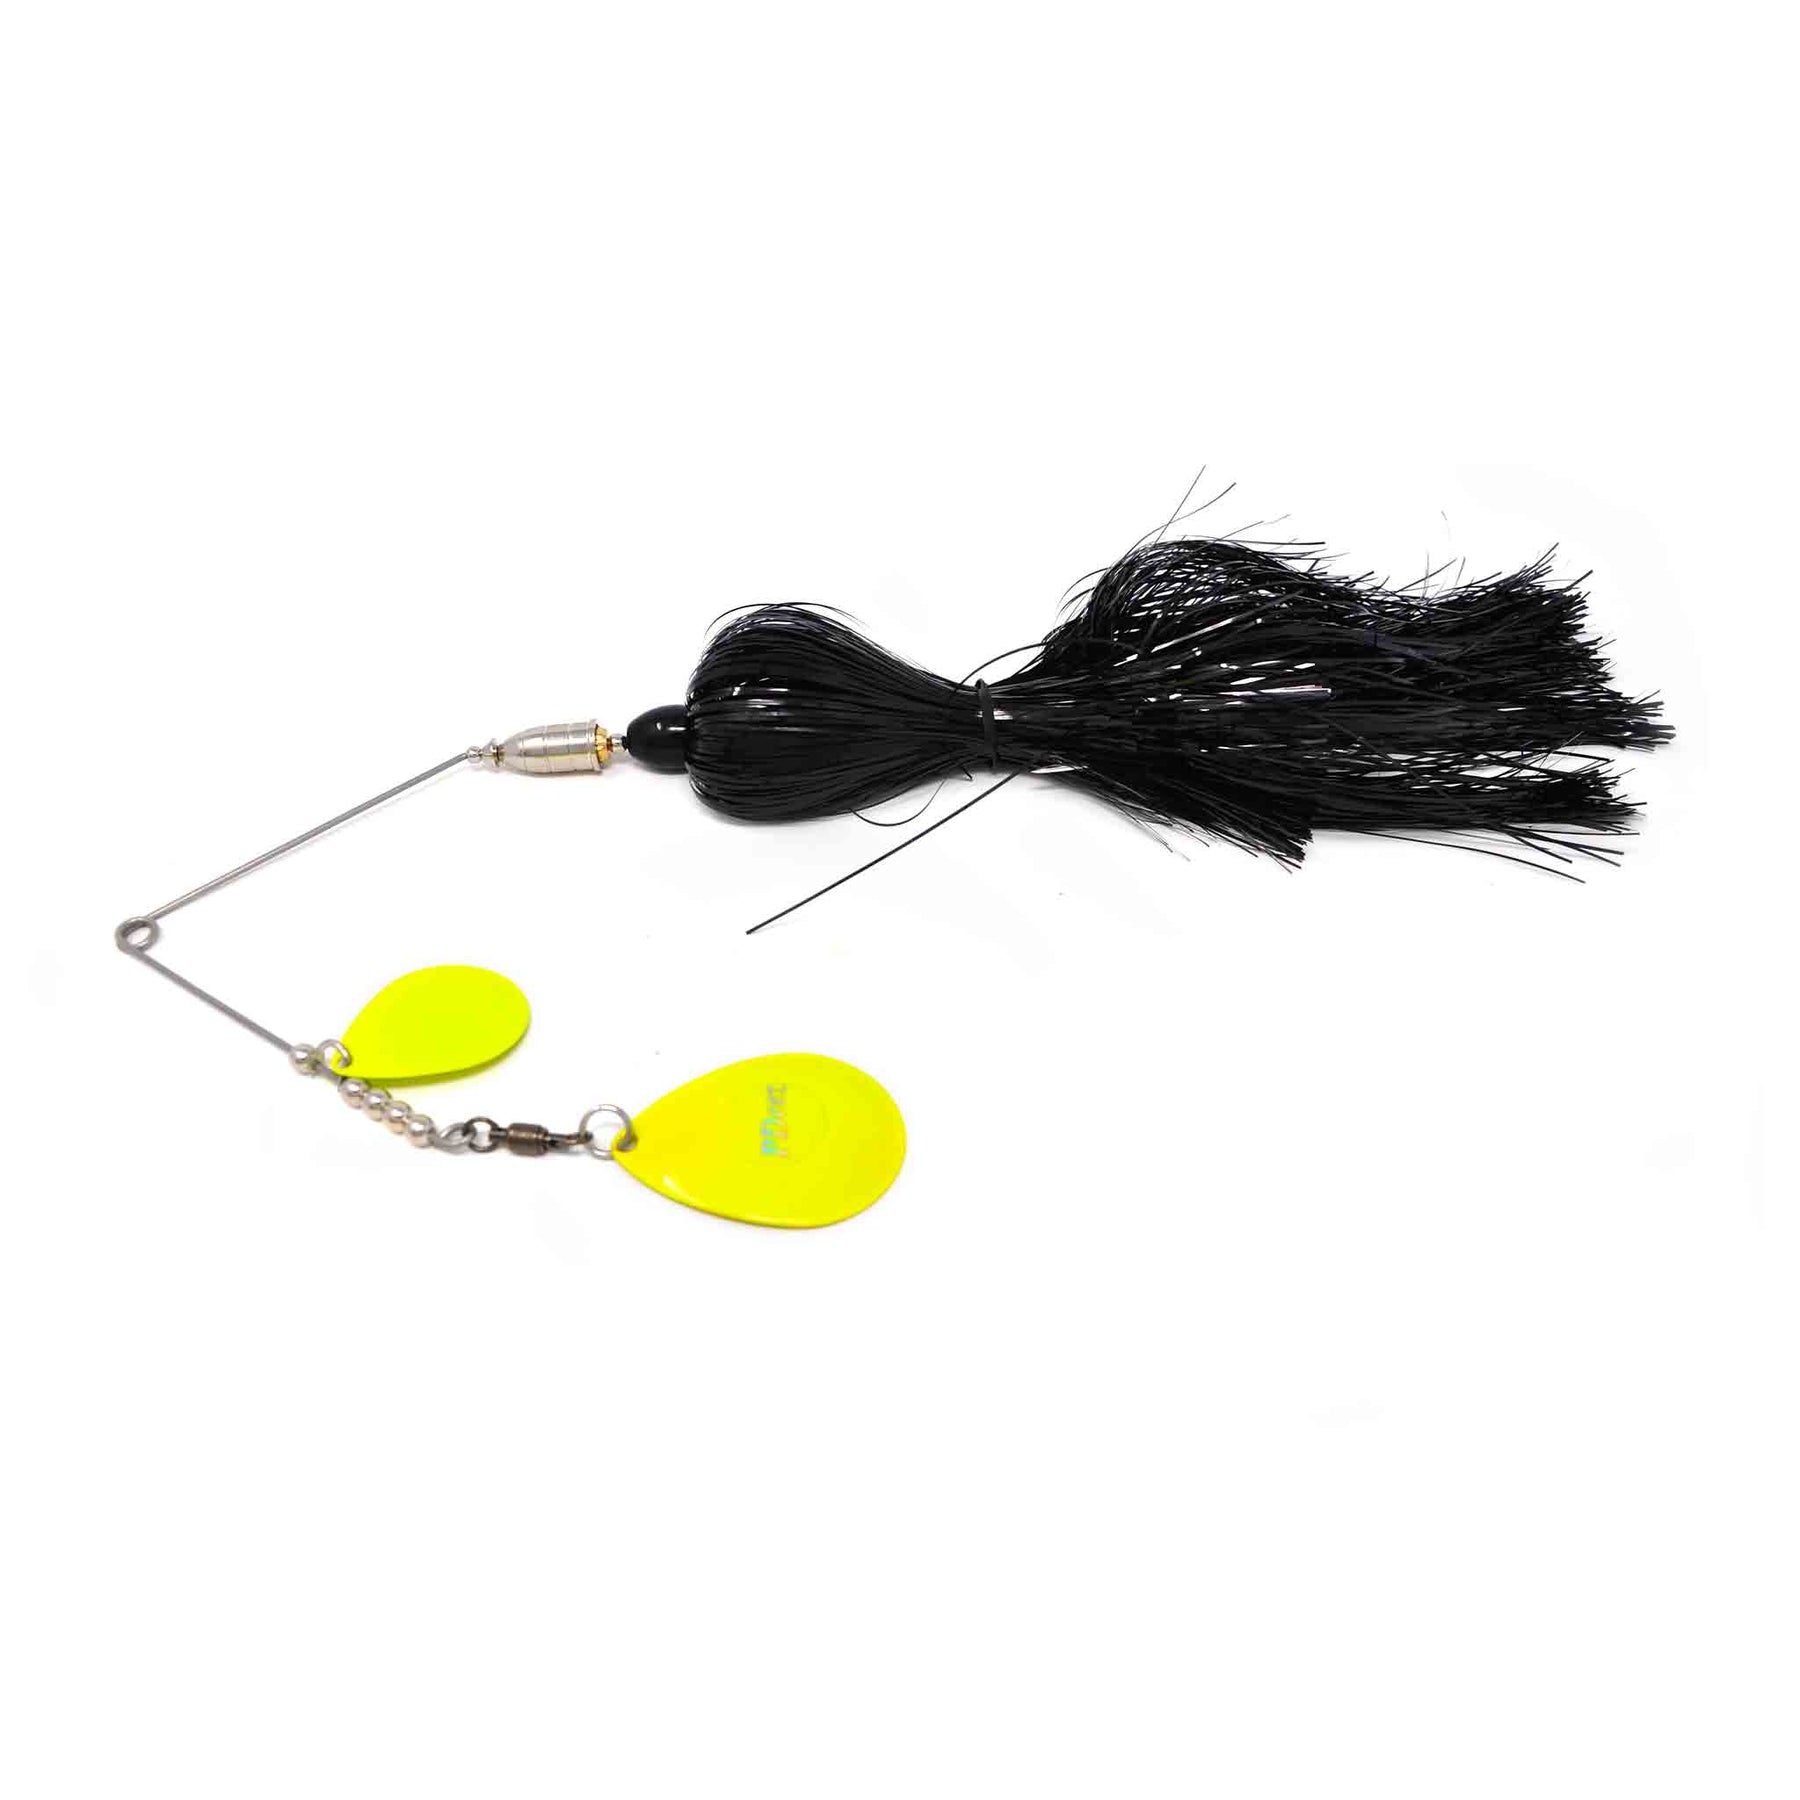 View of Spinnerbaits PDeez Bell Casting Spinnerbait Black / Chartreuse available at EZOKO Pike and Musky Shop